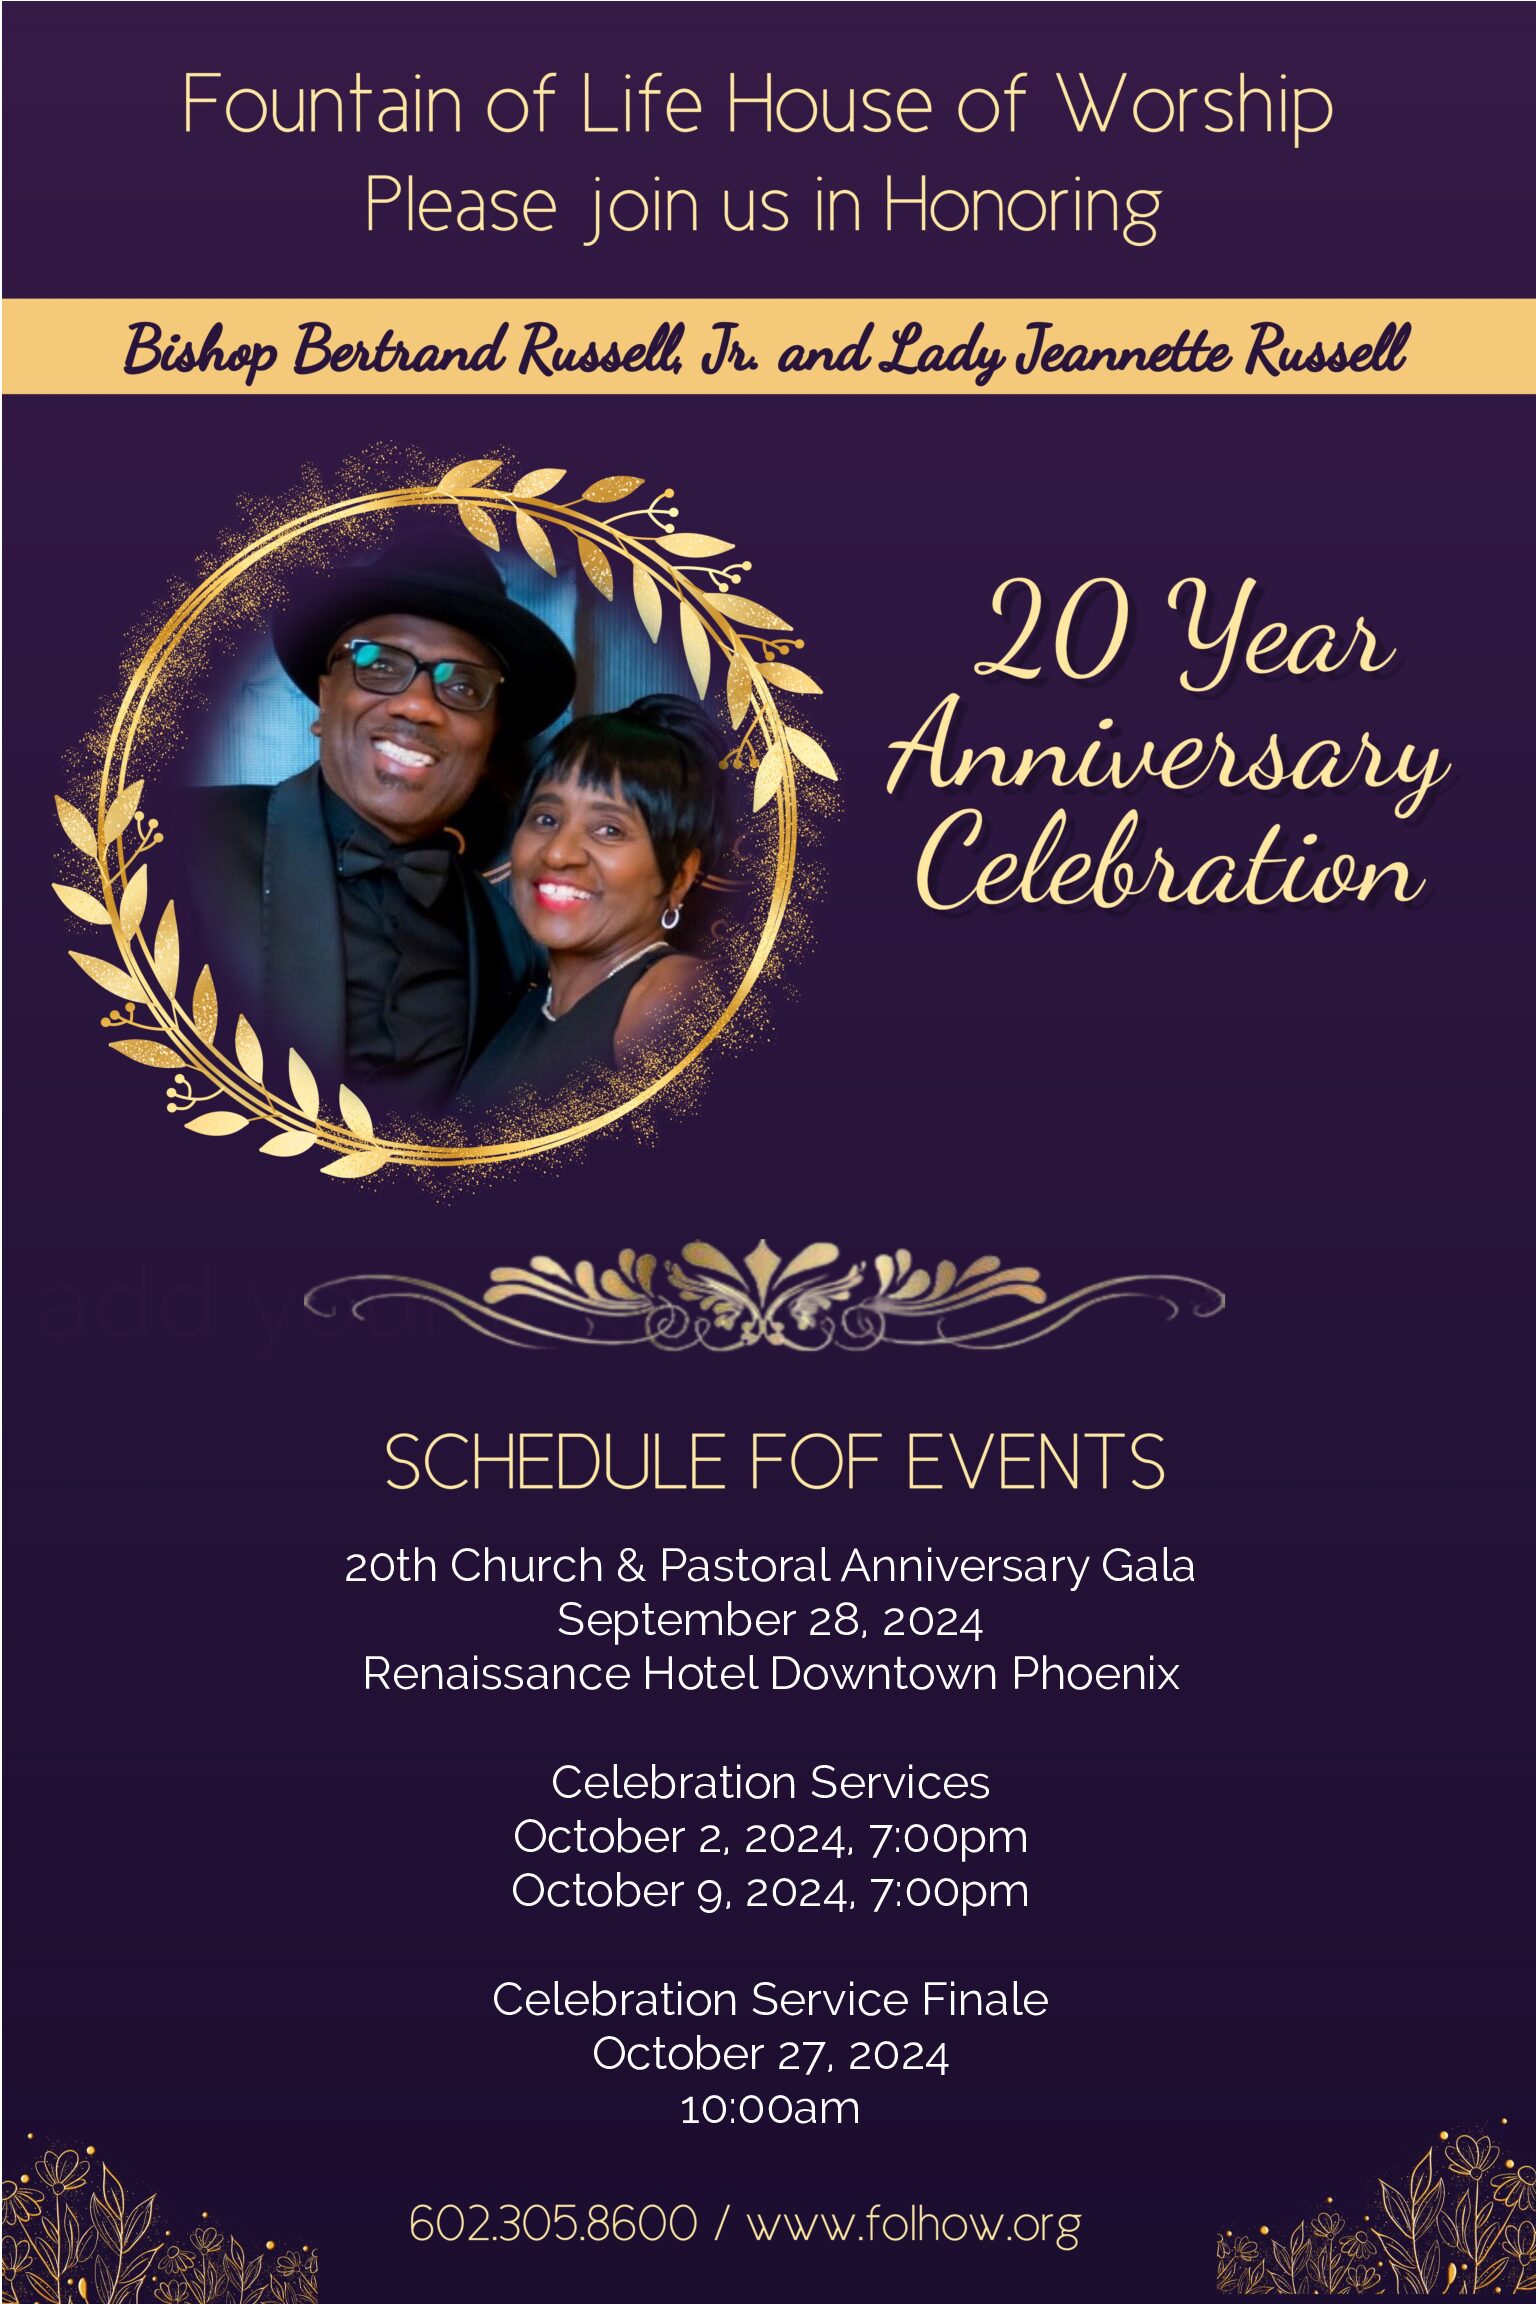 Pastoral and Church Anniversary Gala - Sept. 28